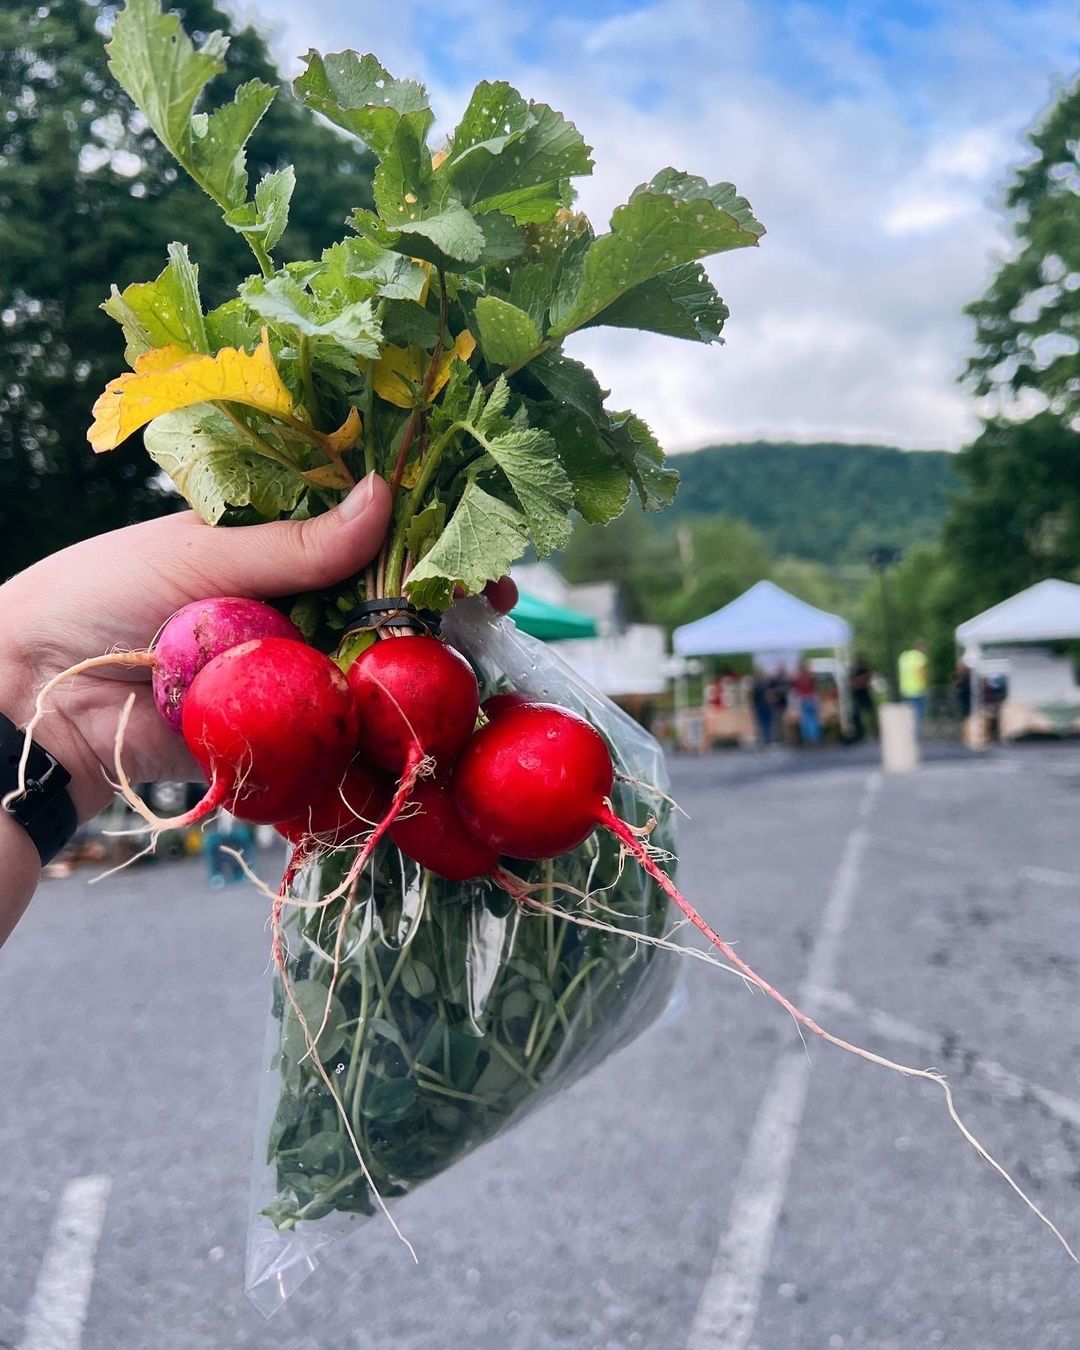 The agriculture industry in Centre County creates an amazing opportunity for agventurers to connect with places, people and all things planted, grown and produced from local resources.
Explore our Featured Destinations 